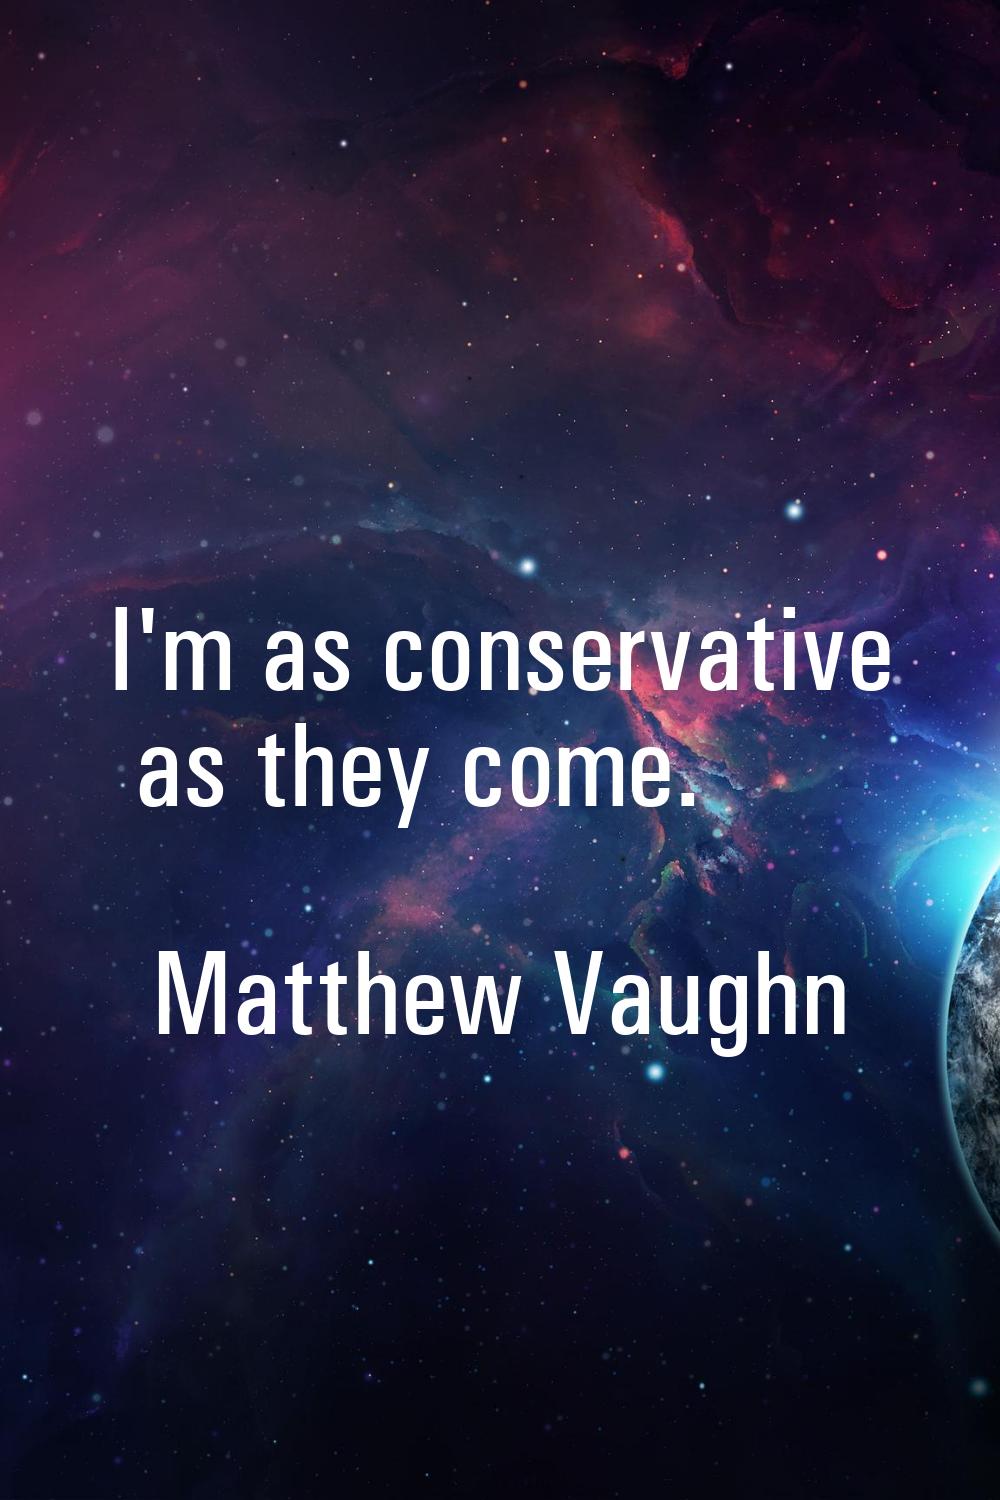 I'm as conservative as they come.